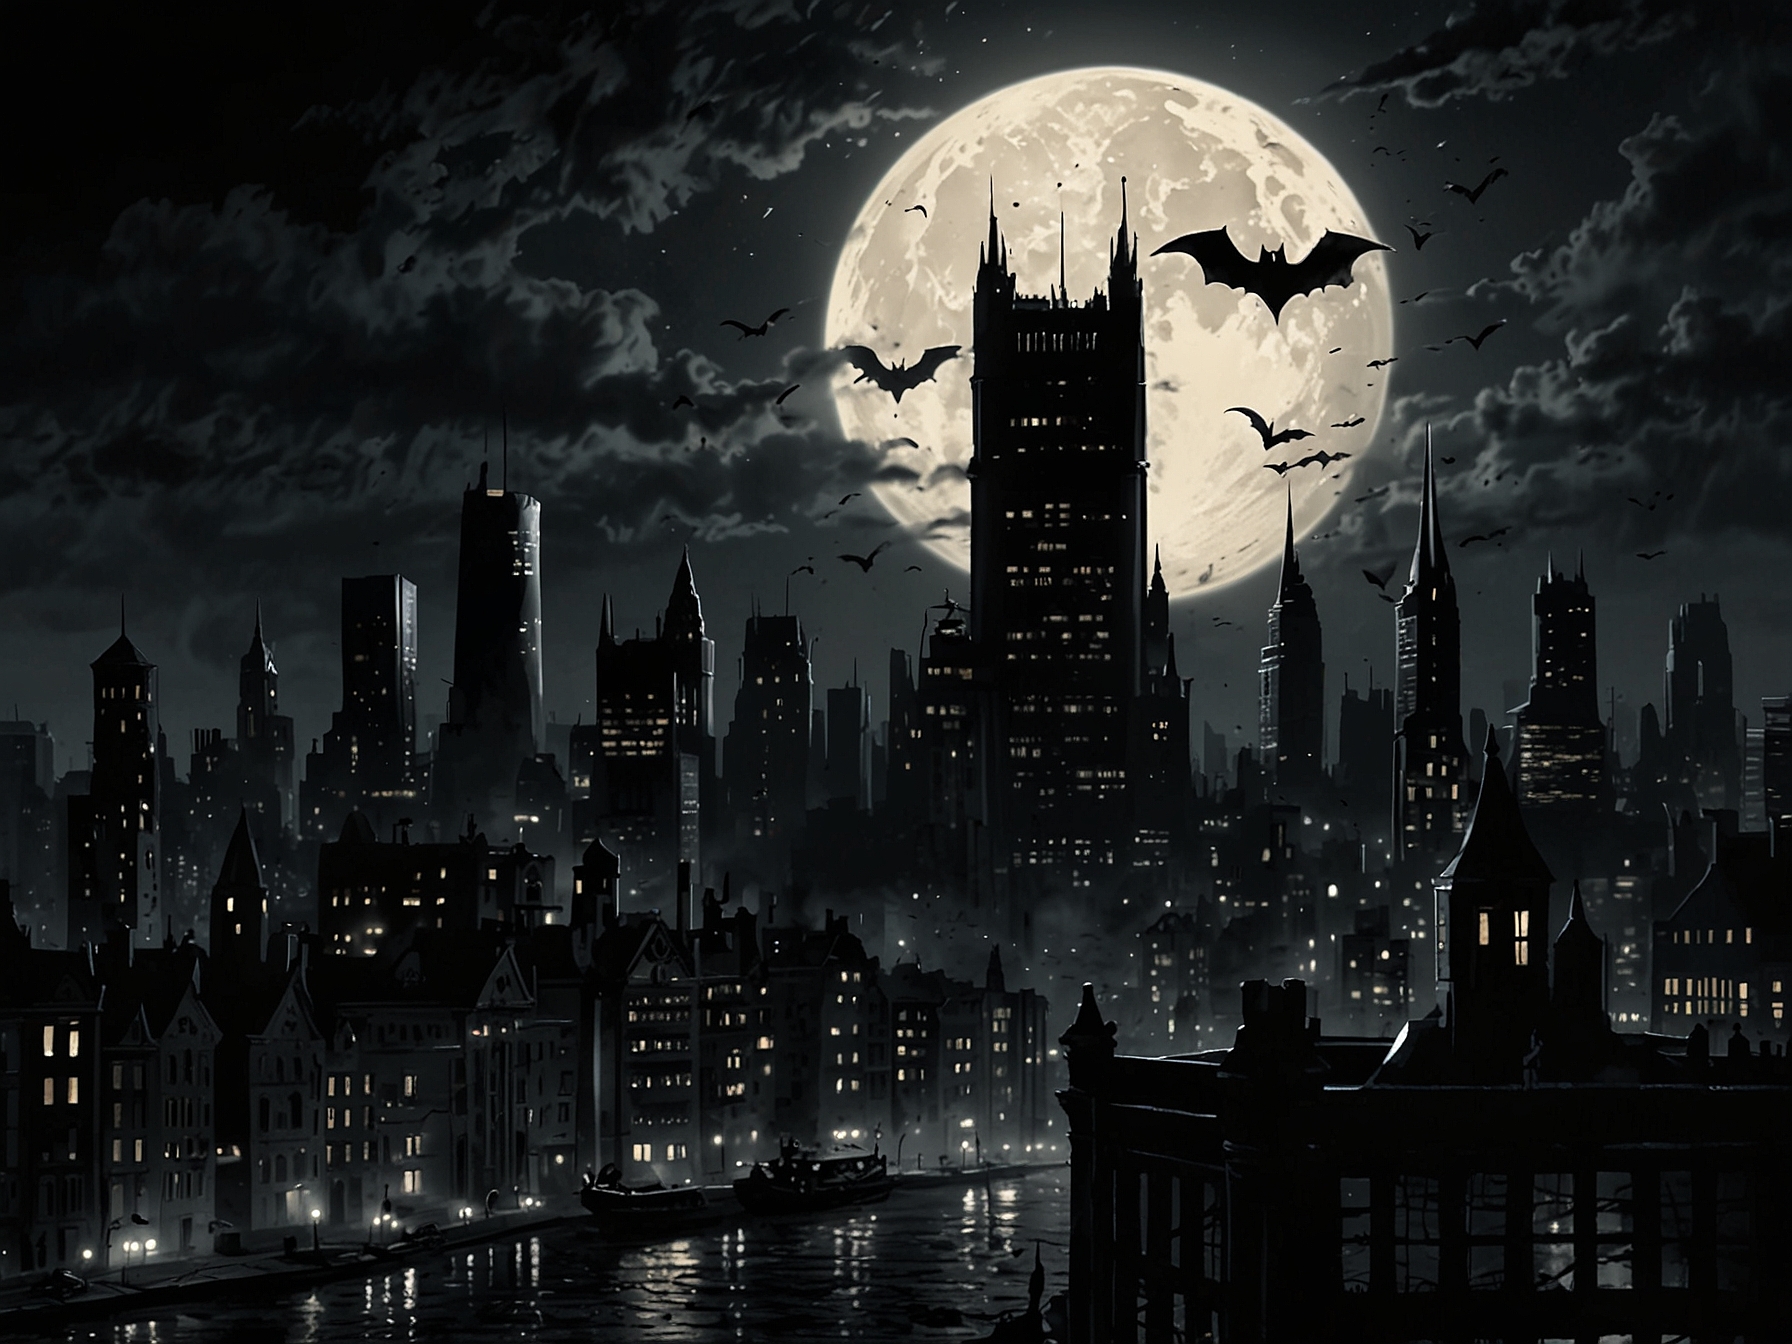 A dark and moody Gotham City skyline at night, illuminated by the Bat-Signal shining in the sky, setting the tone for Batman: Caped Crusader and its noir elements.